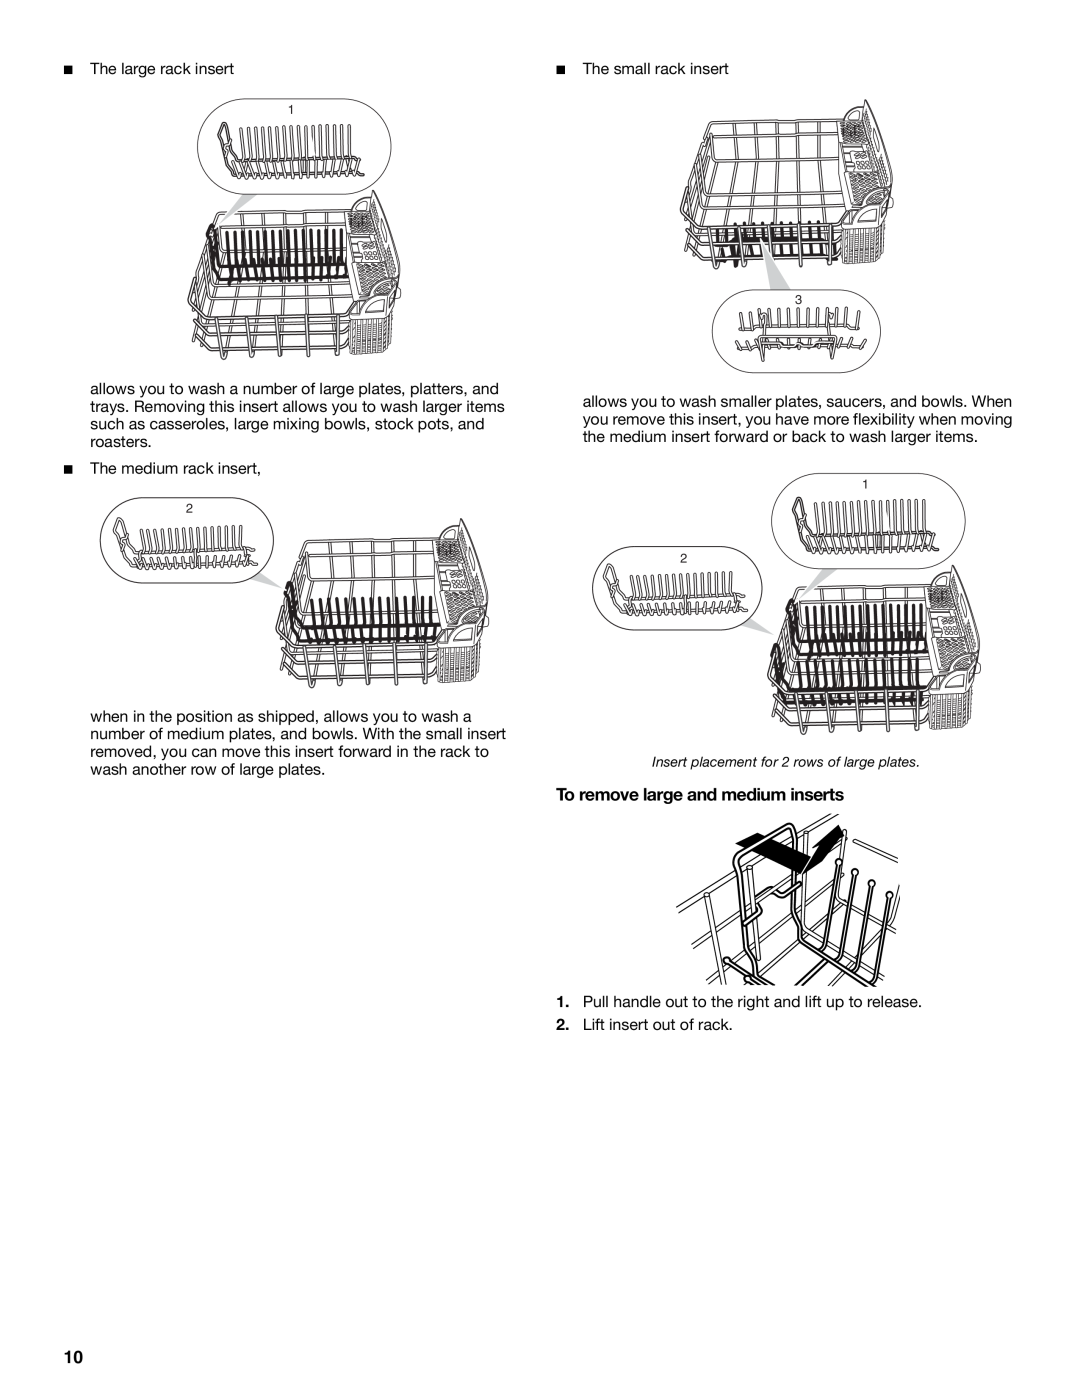 KitchenAid KUDS01DL manual To remove large and medium inserts 